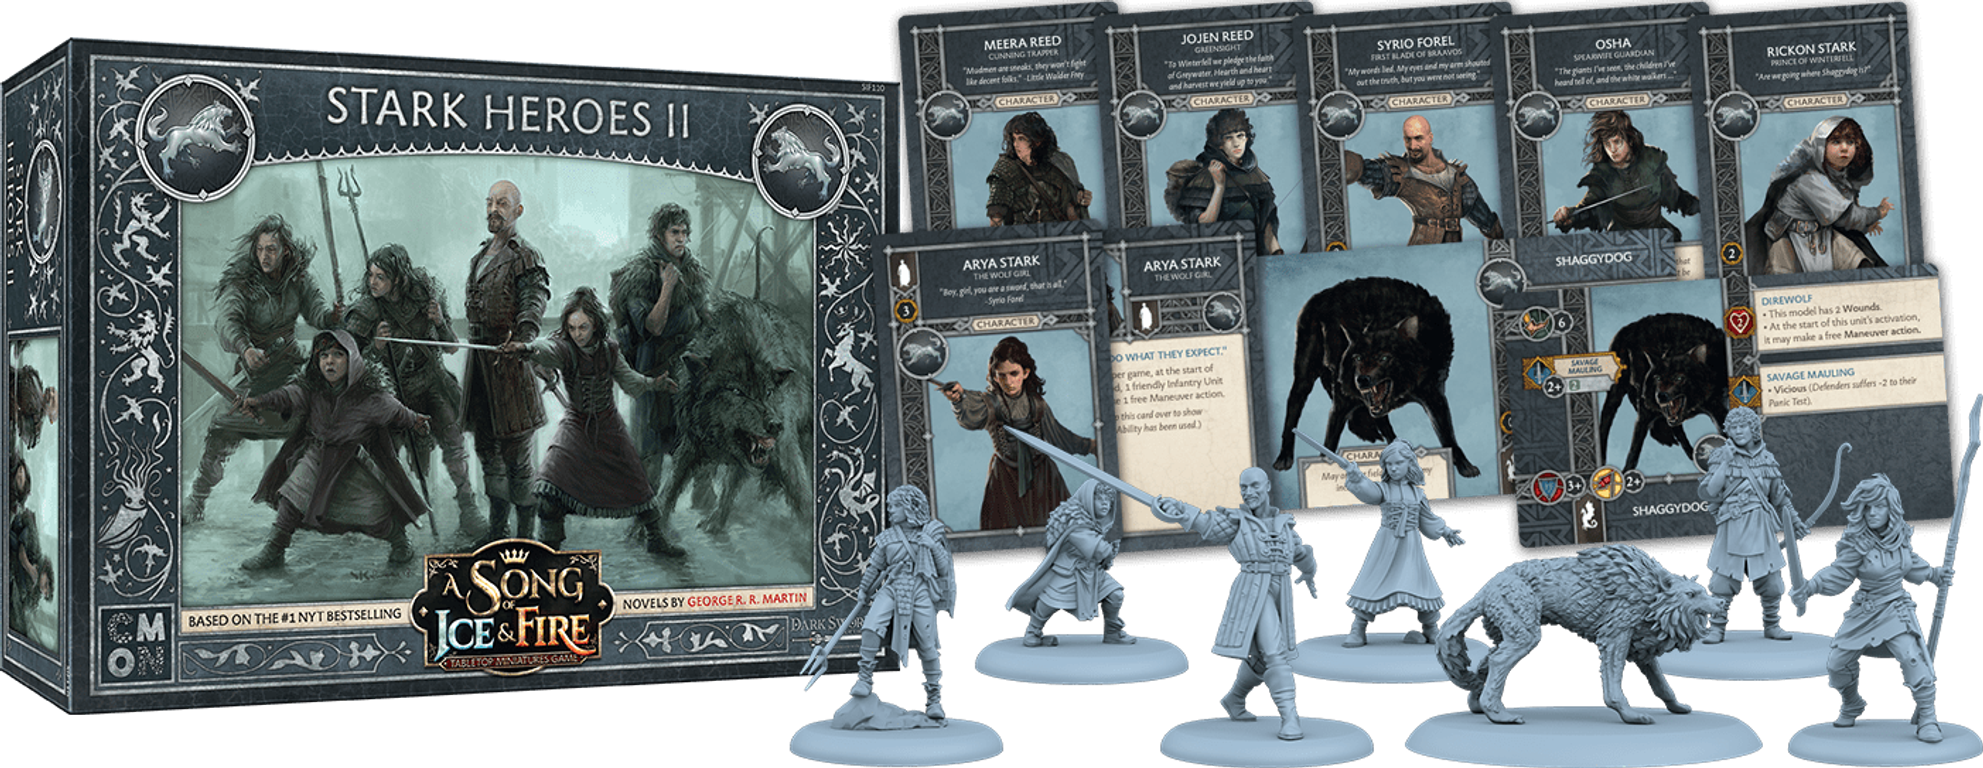 A Song of Ice & Fire: Tabletop Miniatures Game – Stark Heroes II components